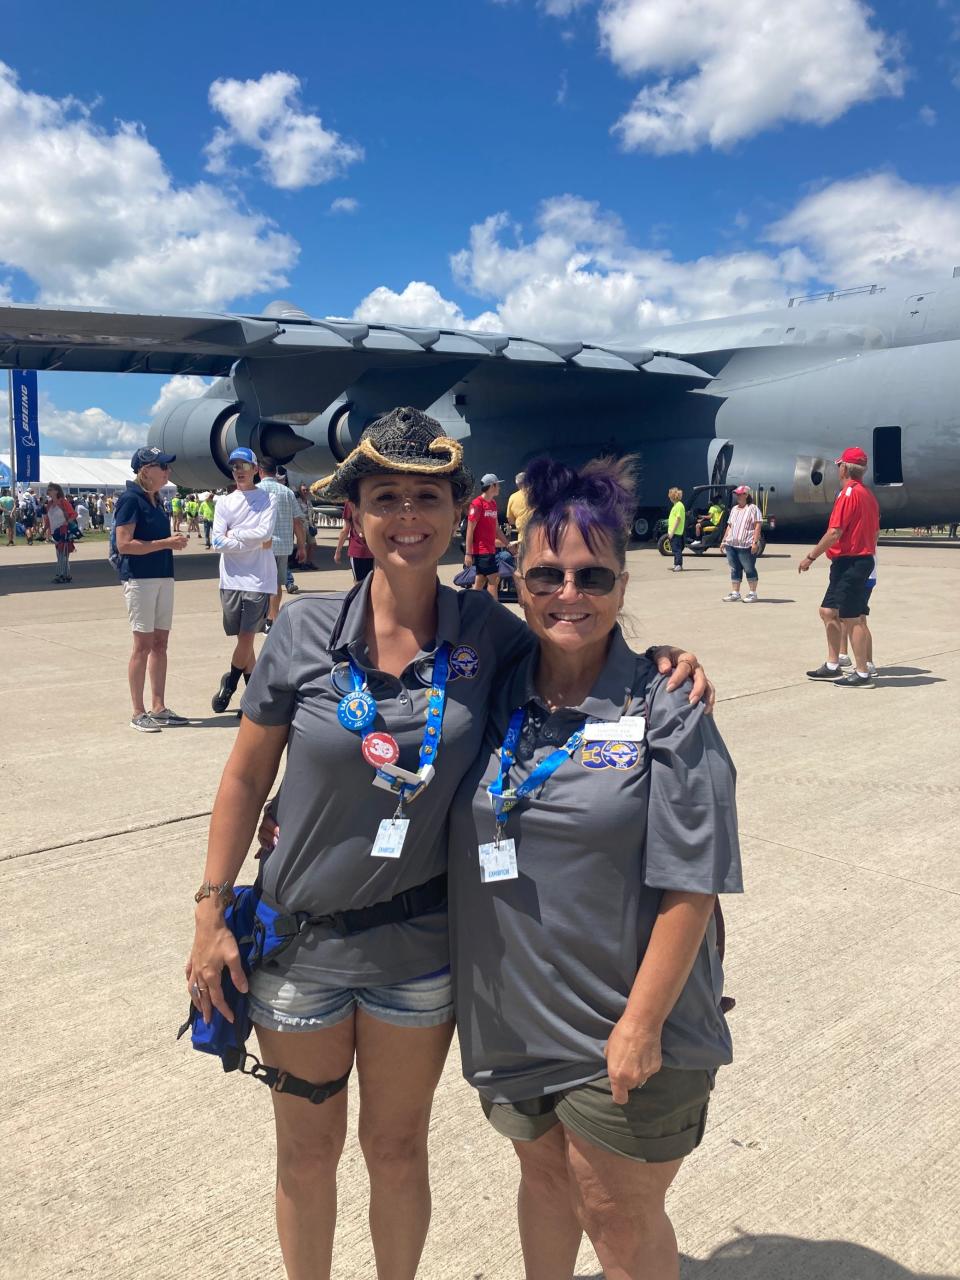 Rebecca (left) and Deanie Southard are a daughter and mother duo who help coordinate Young Eagles programs at their EAA Chapters in San Antonio, Texas and Las Cruces, New Mexico, respectively.